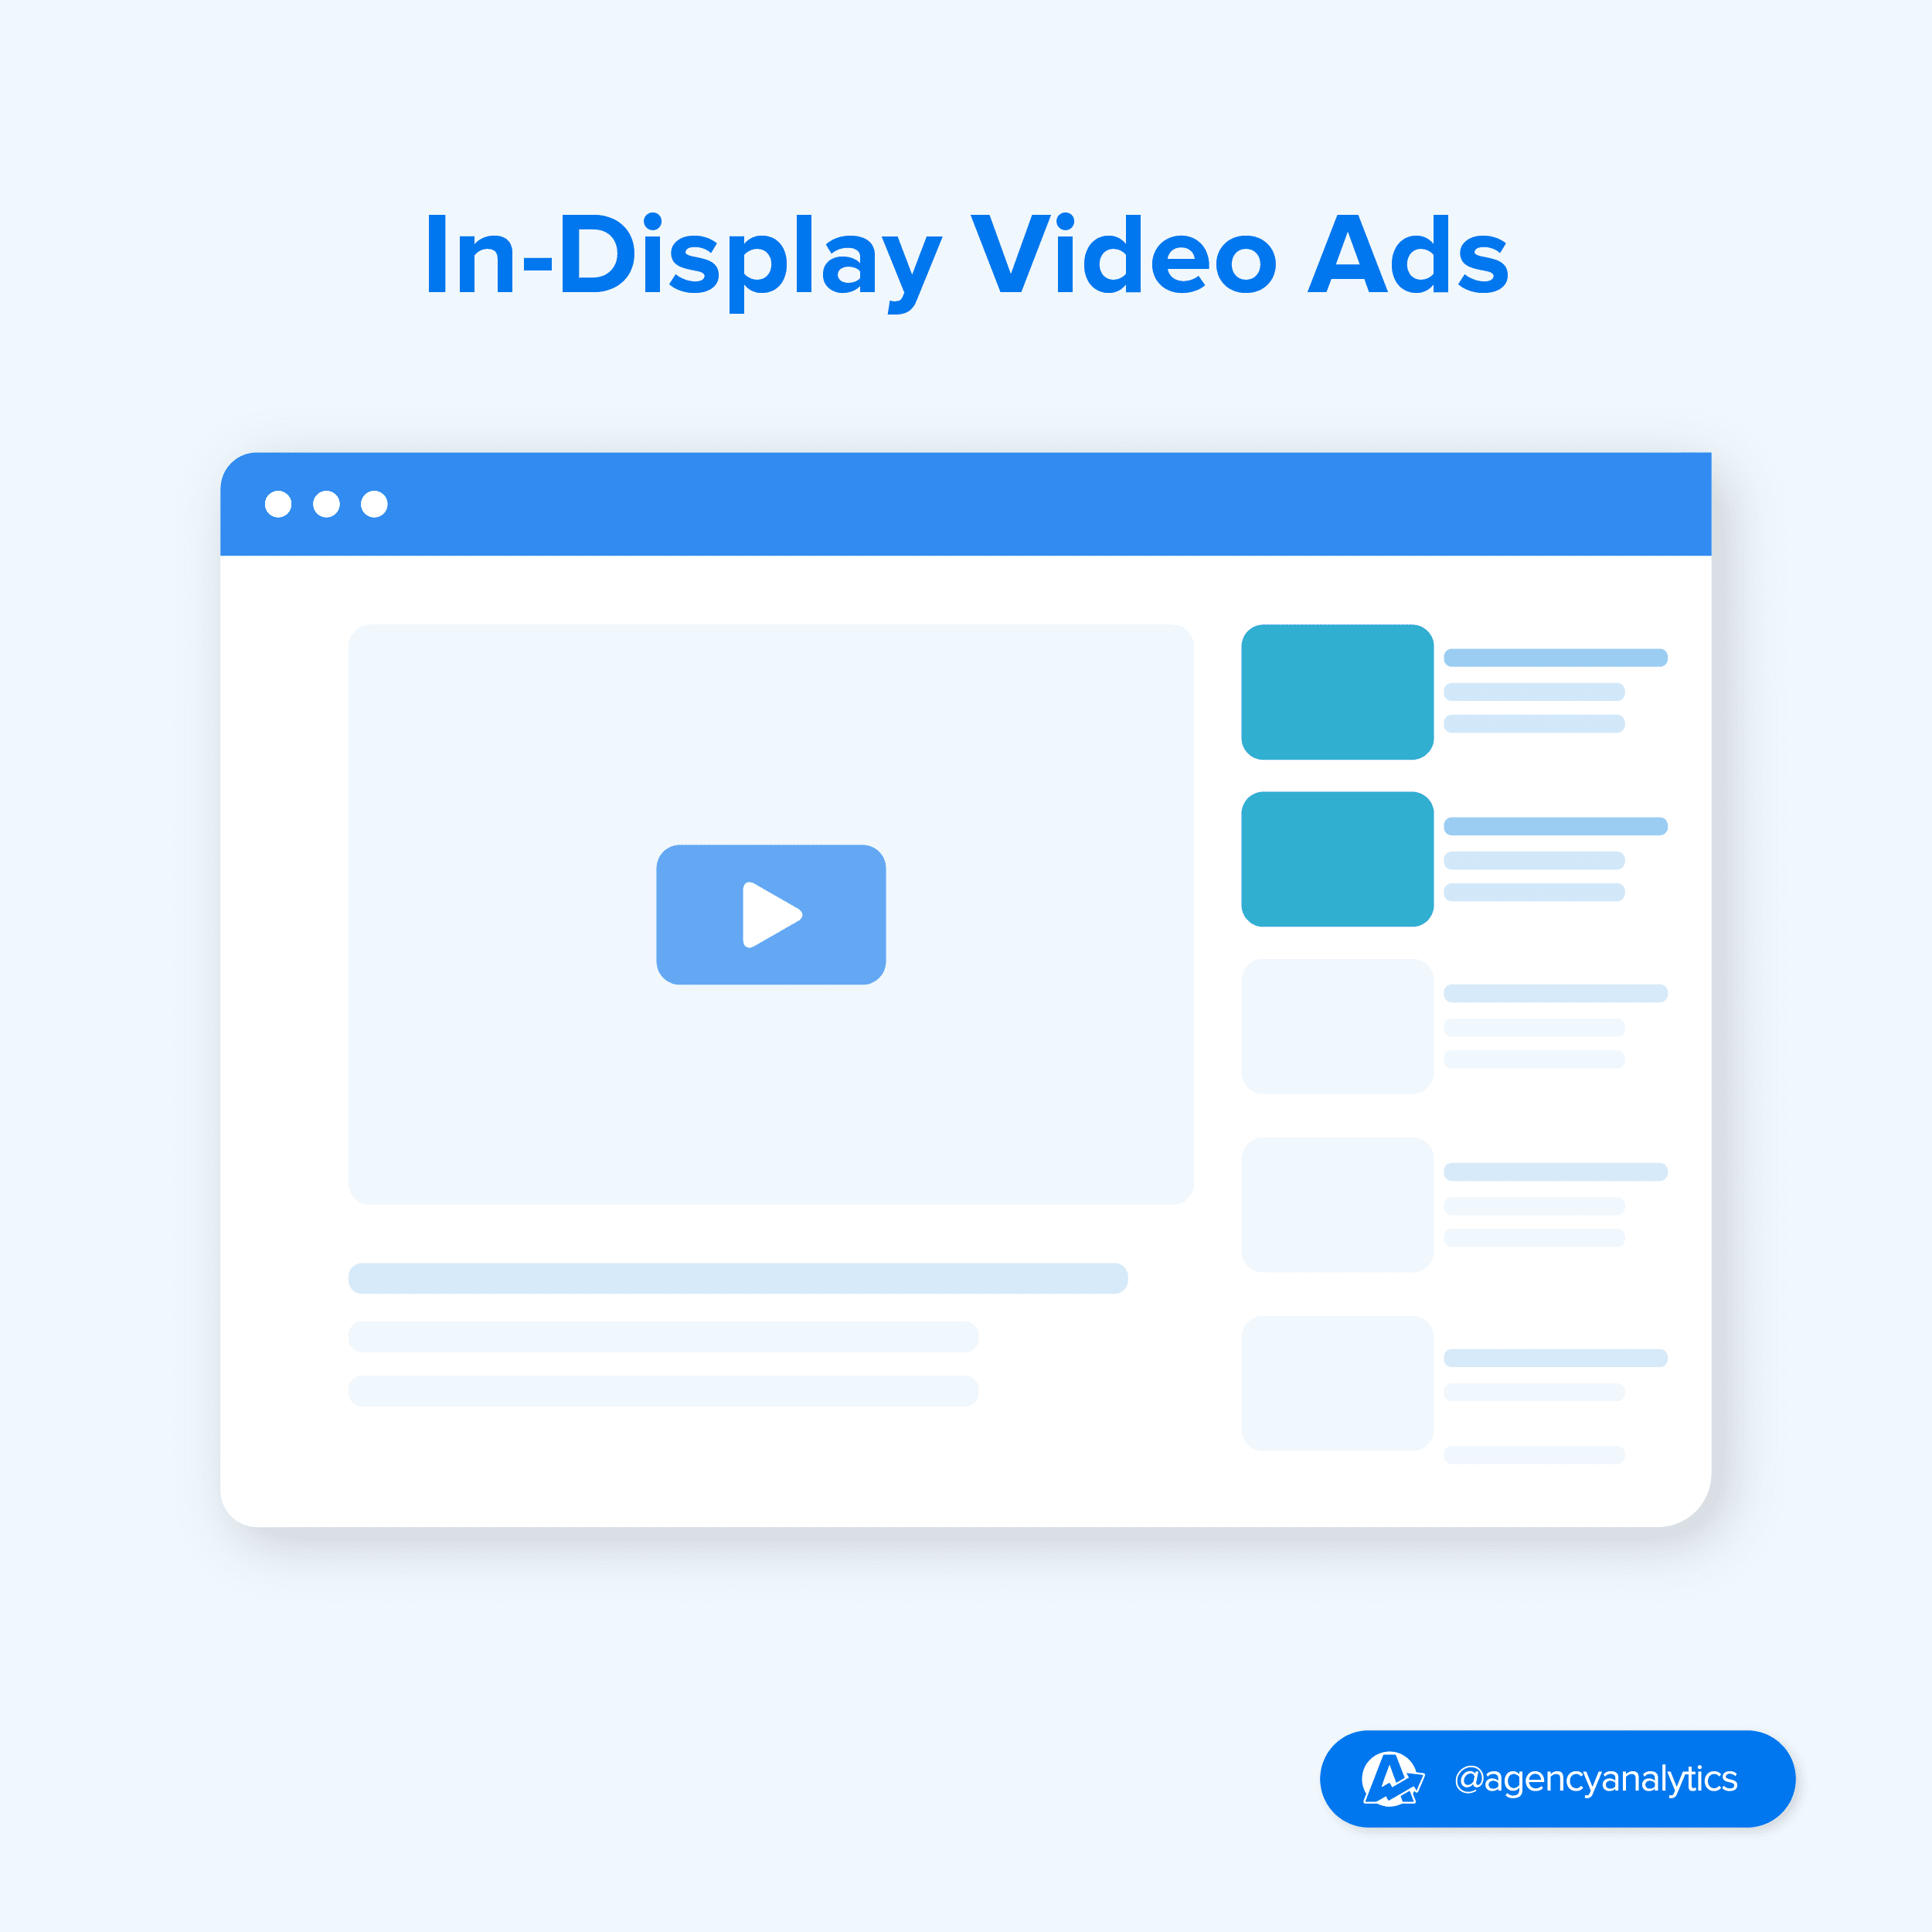 Illustration of In-Display Video Ads